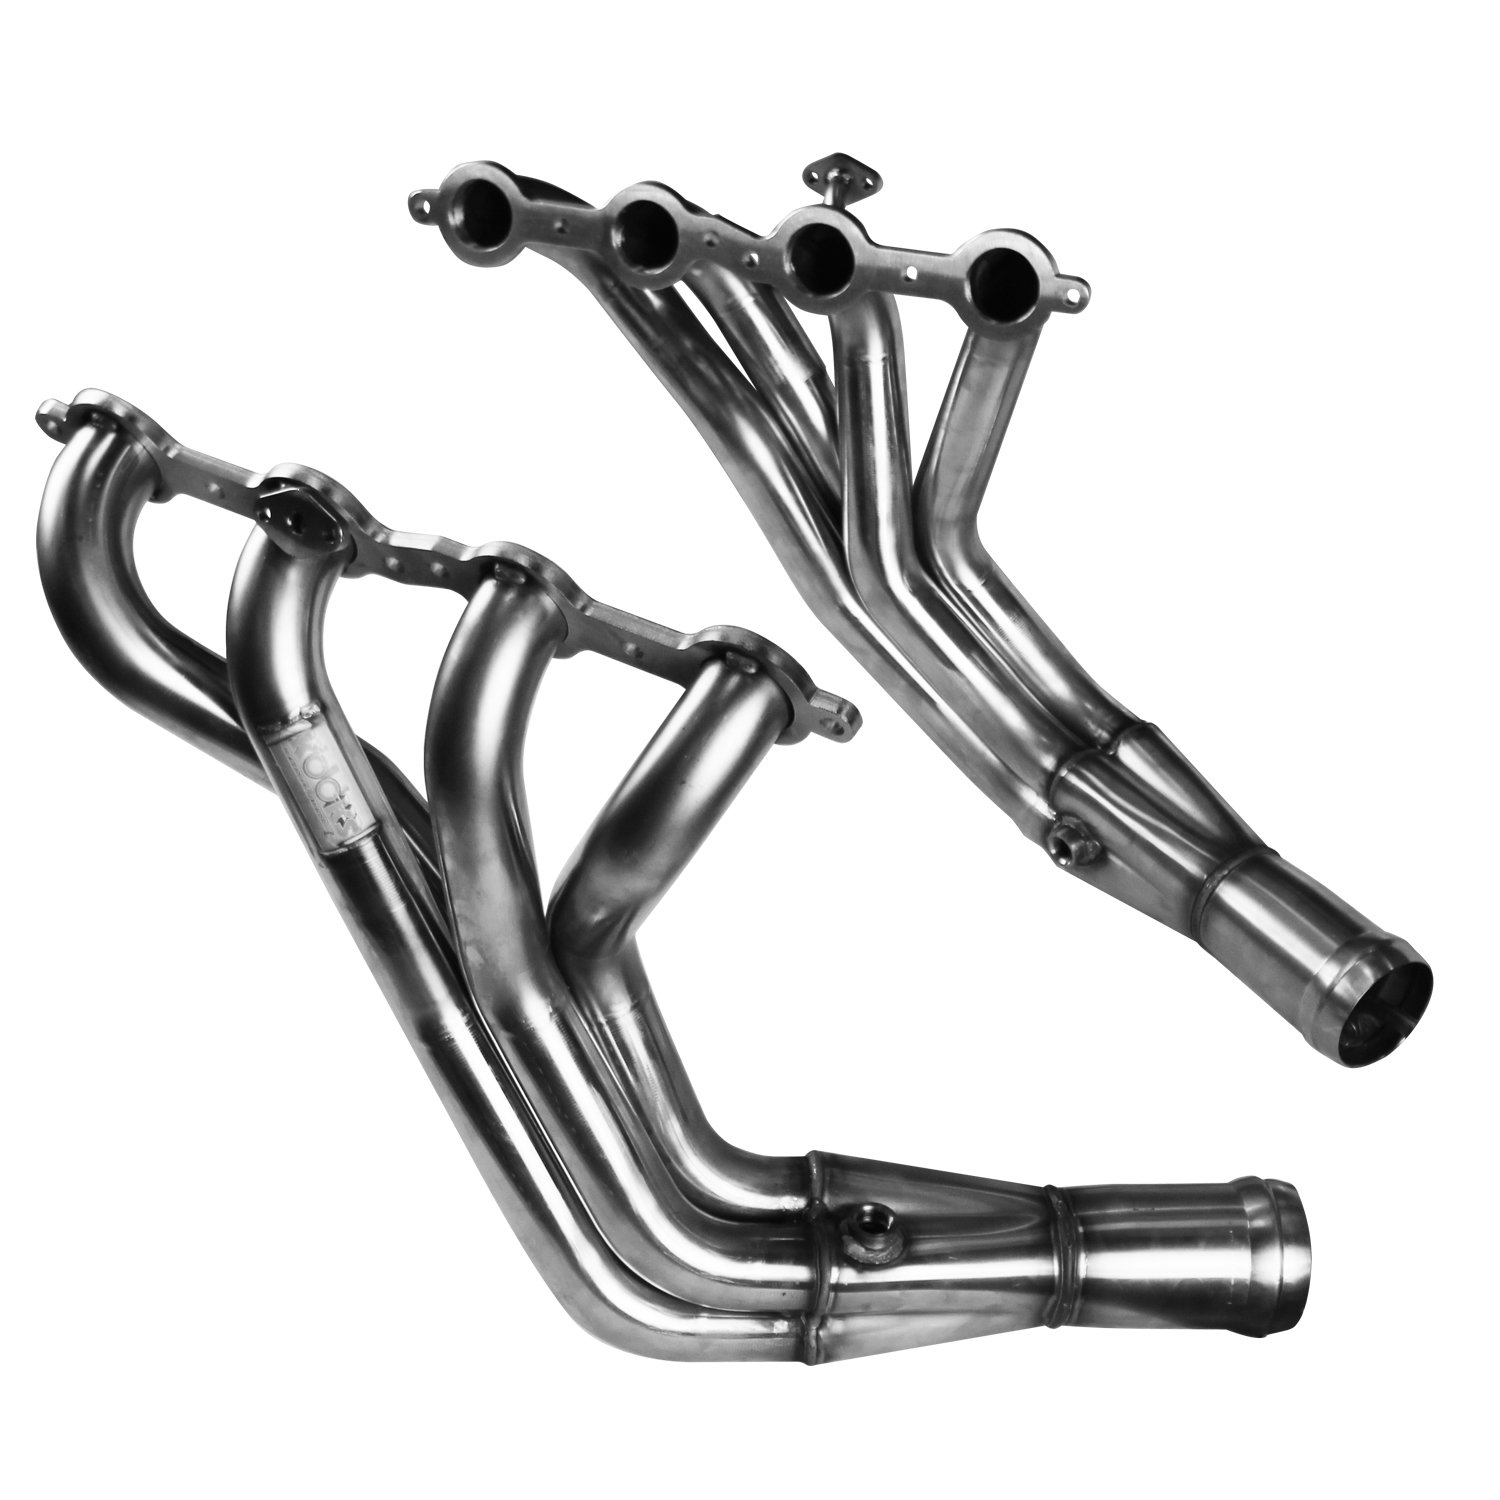 Stainless Steel Headers Street Version 1.75 x 3" Long Tube 97-04 Corvette C5 LS1/LS6 5.7L w/Air Tubes And O2 Fittings w/Merge Co